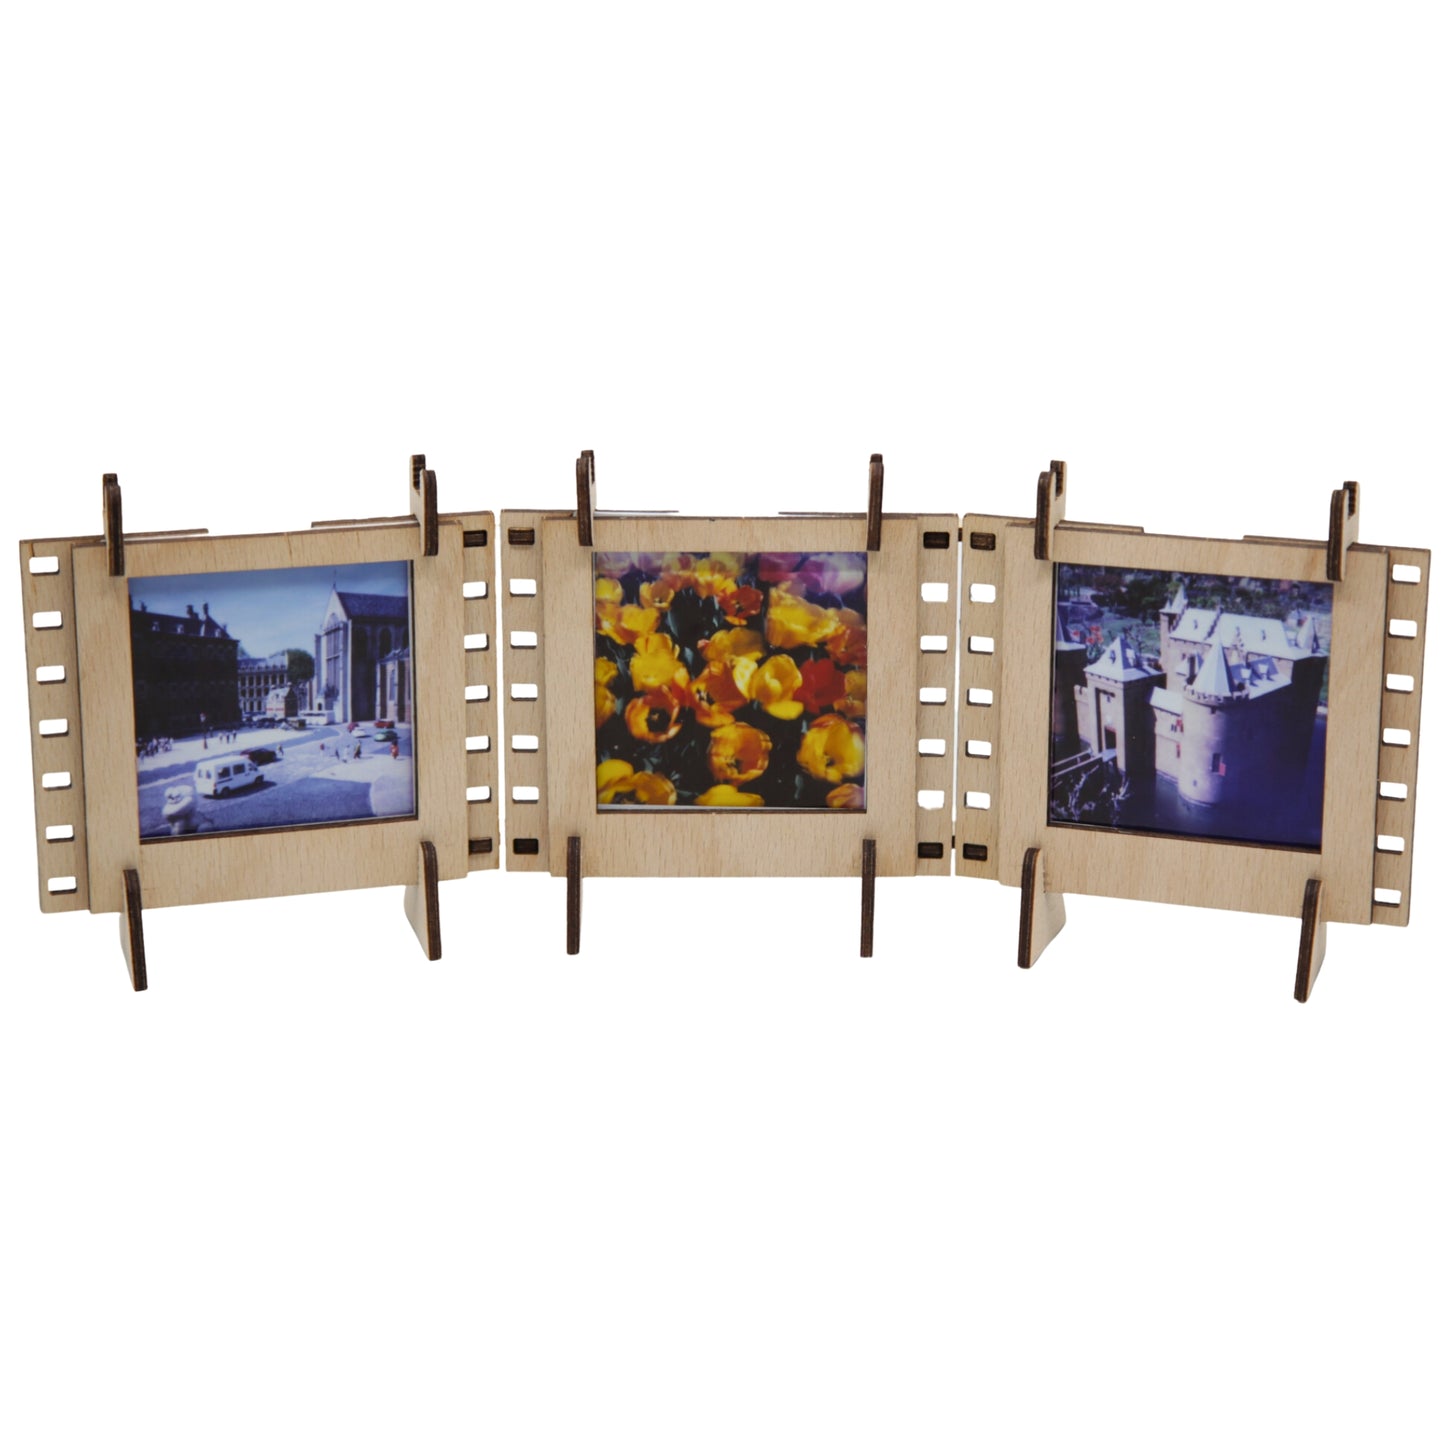 A set of three Natural plywood interconnectable Instax SQUARE film photo frames for instant SQUARE photos.